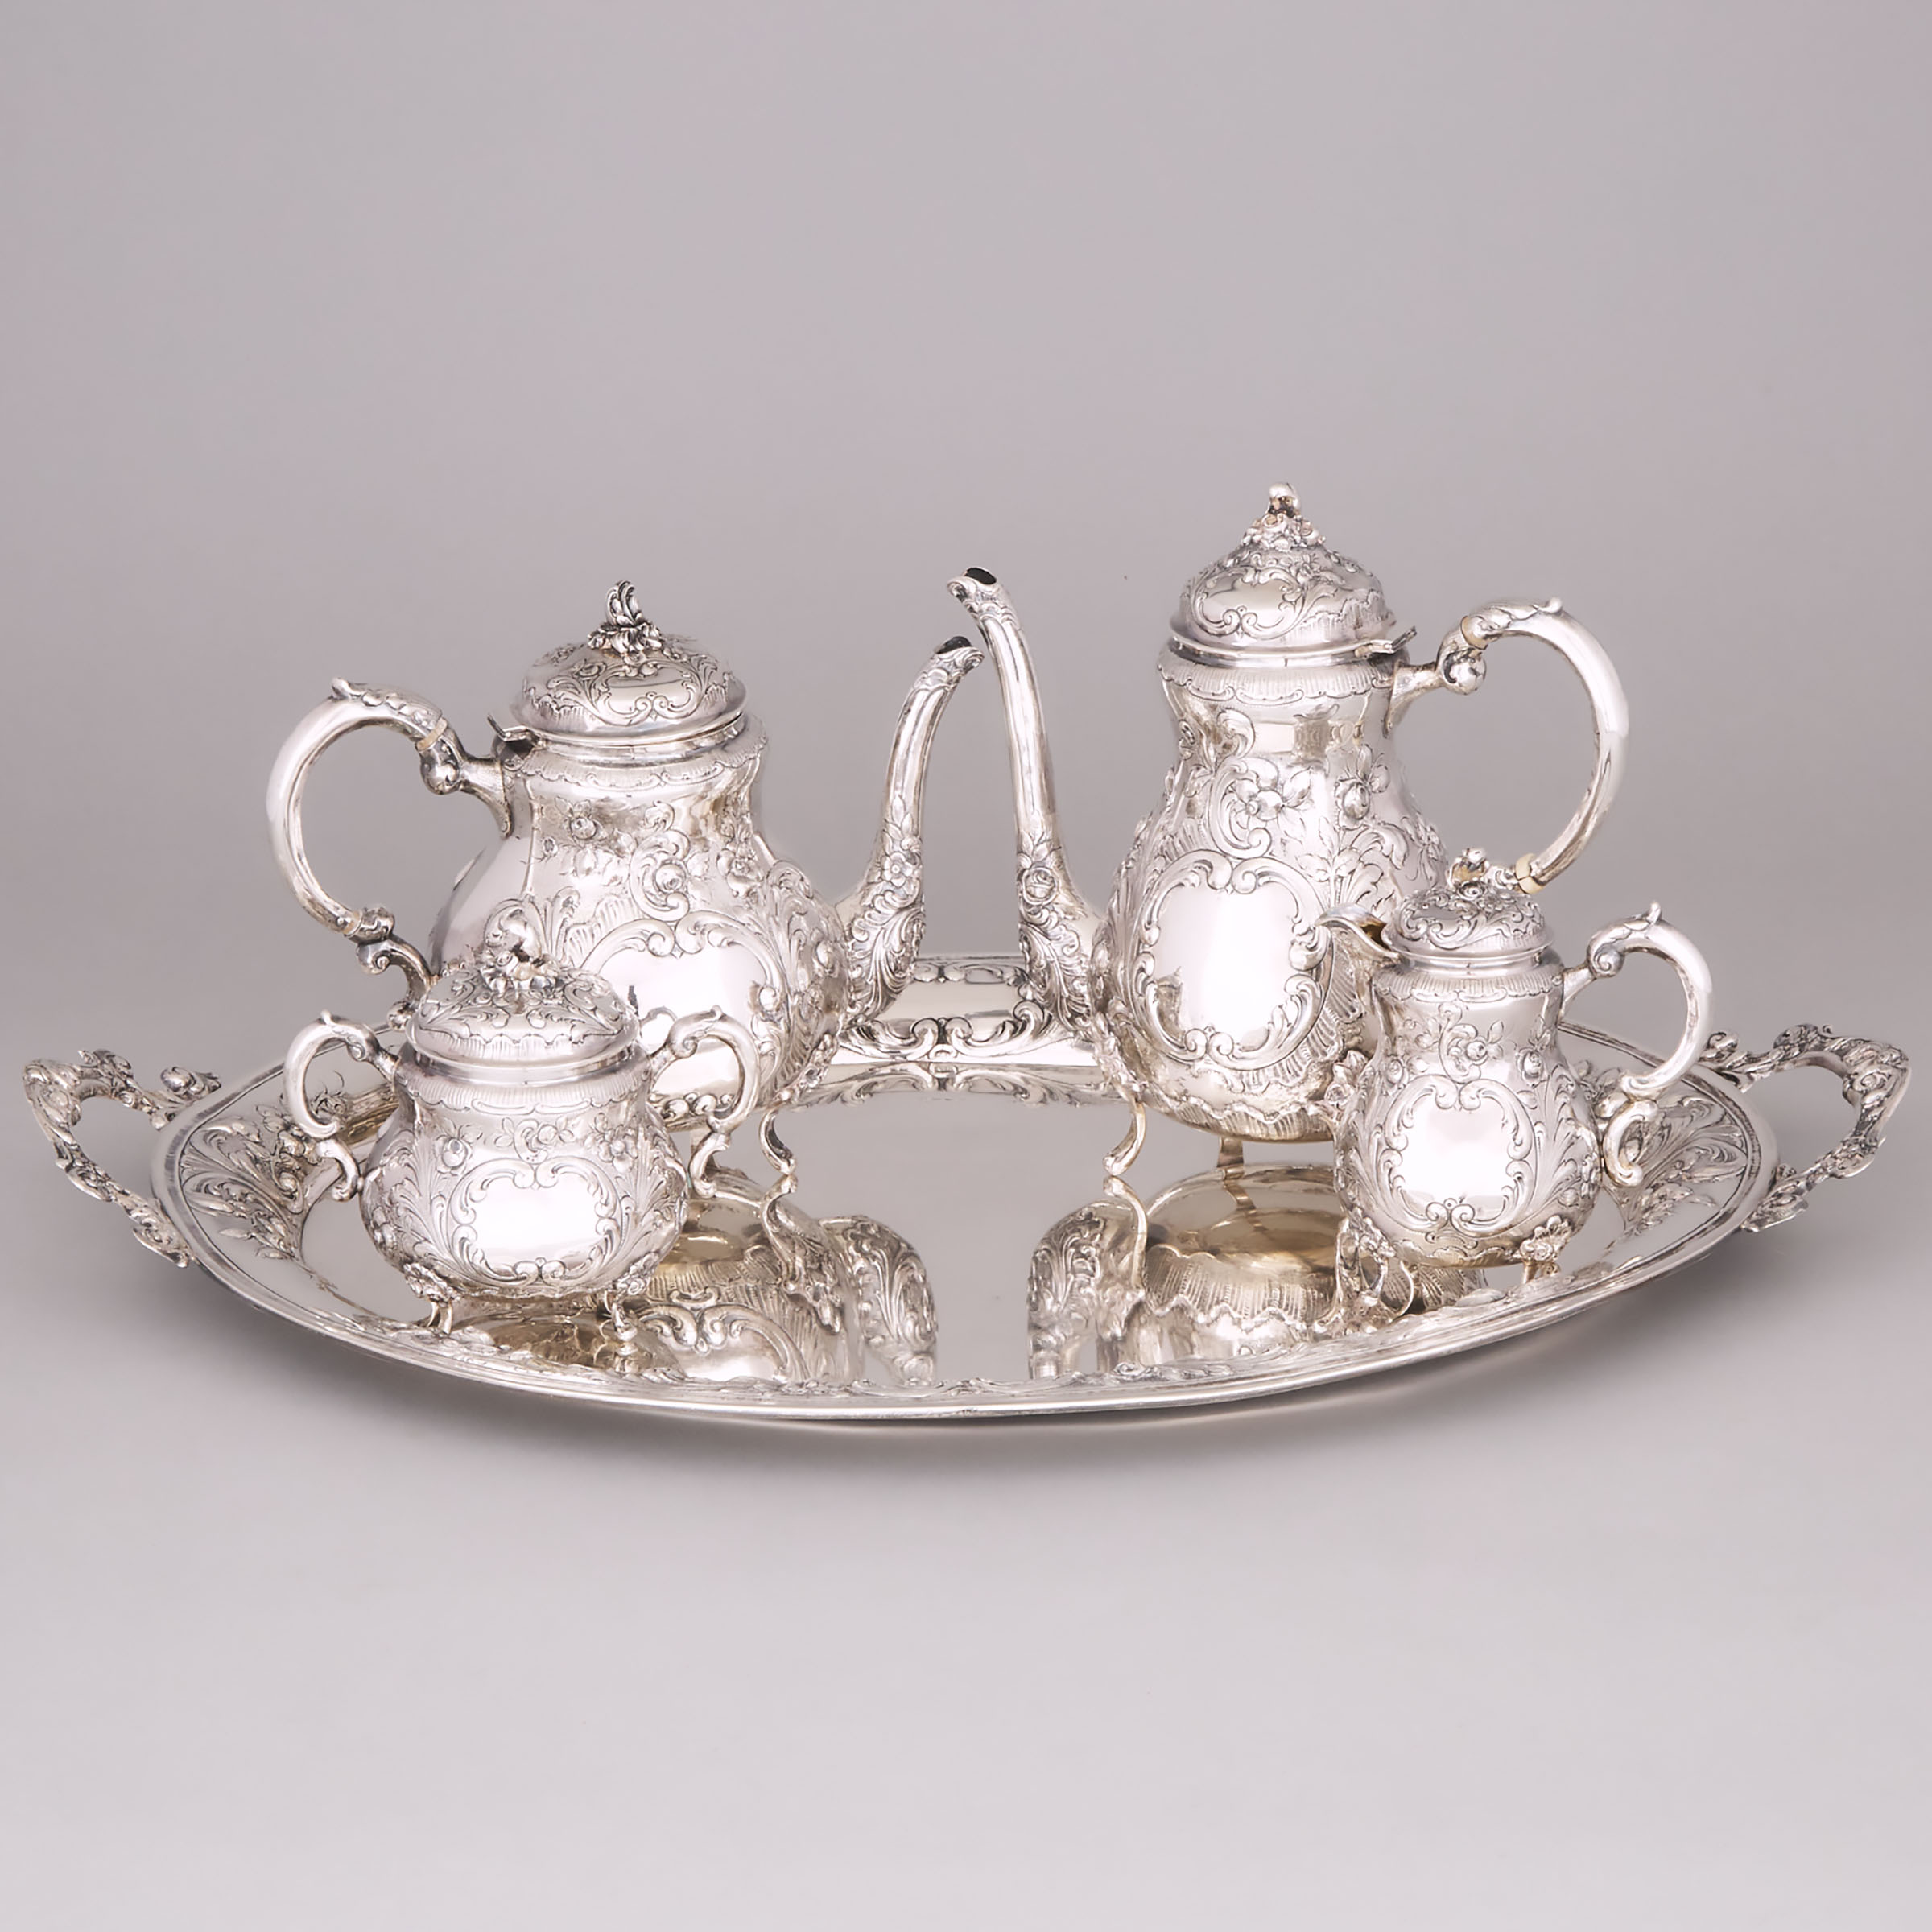 Continental Silver Tea and Coffee Service, probably German, early 20th century